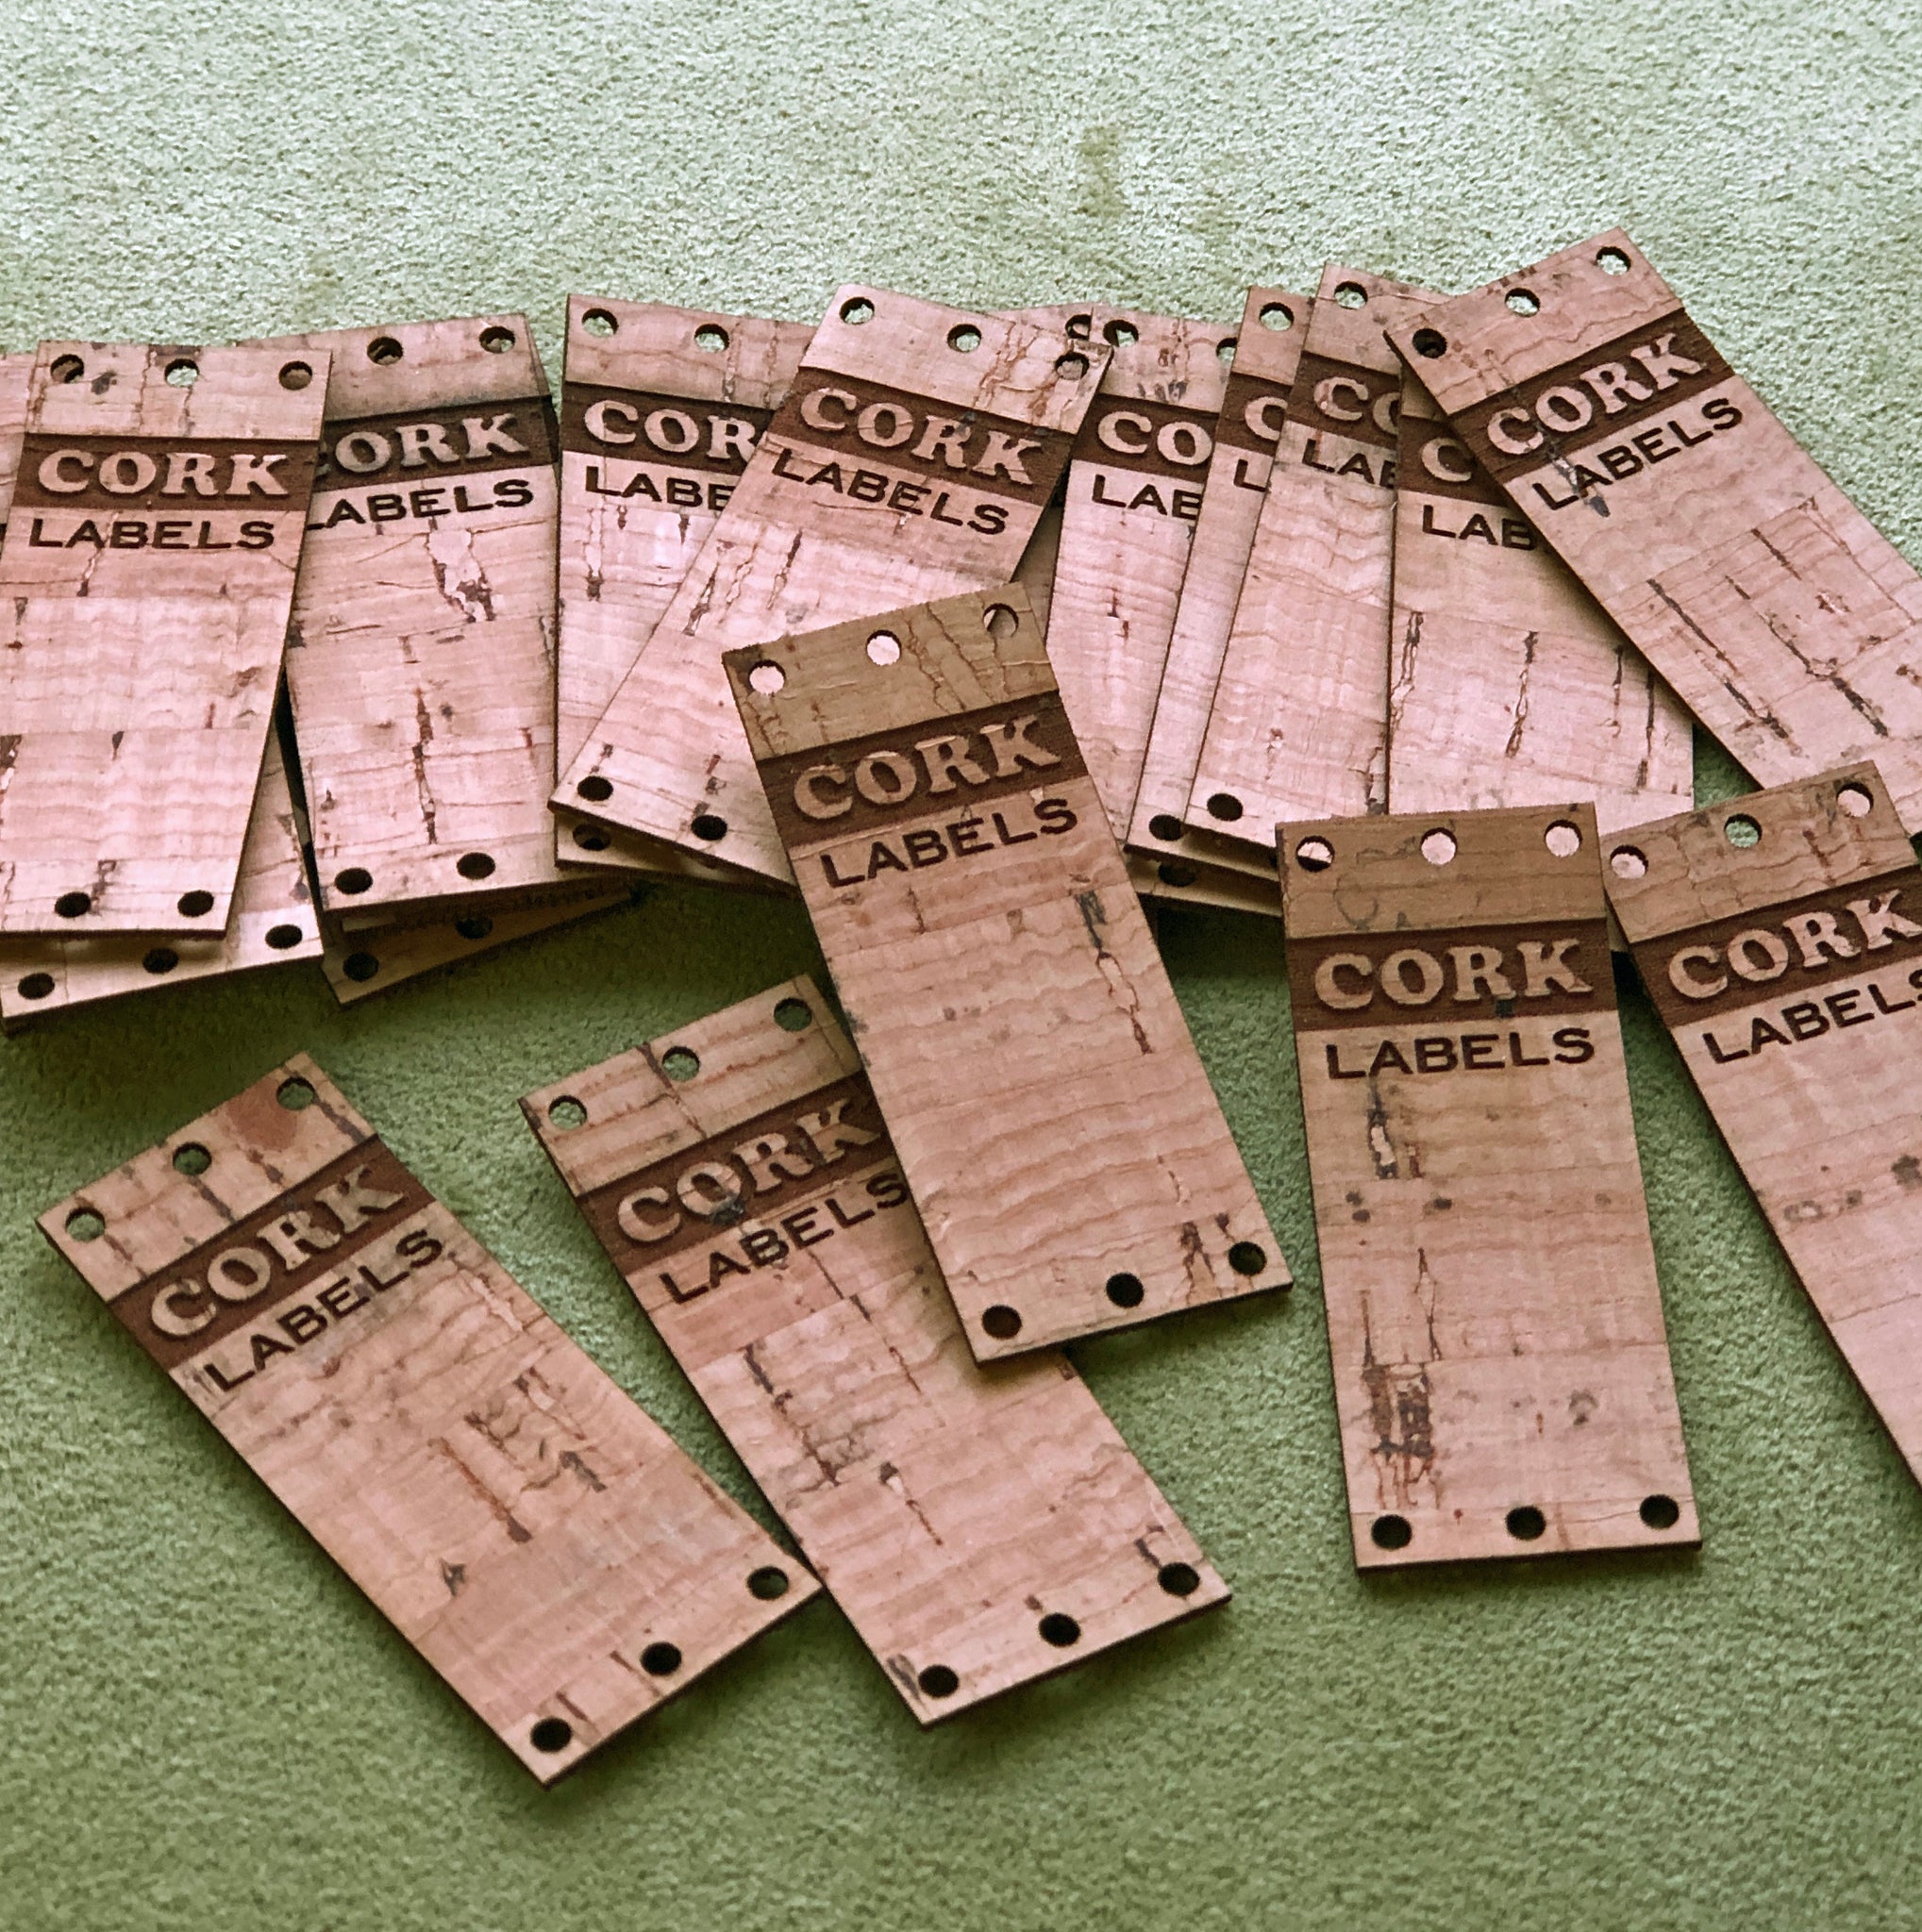 Cork Fabric Labels 0.75 x 2 inches, sold in sets of 25 - allthiswood